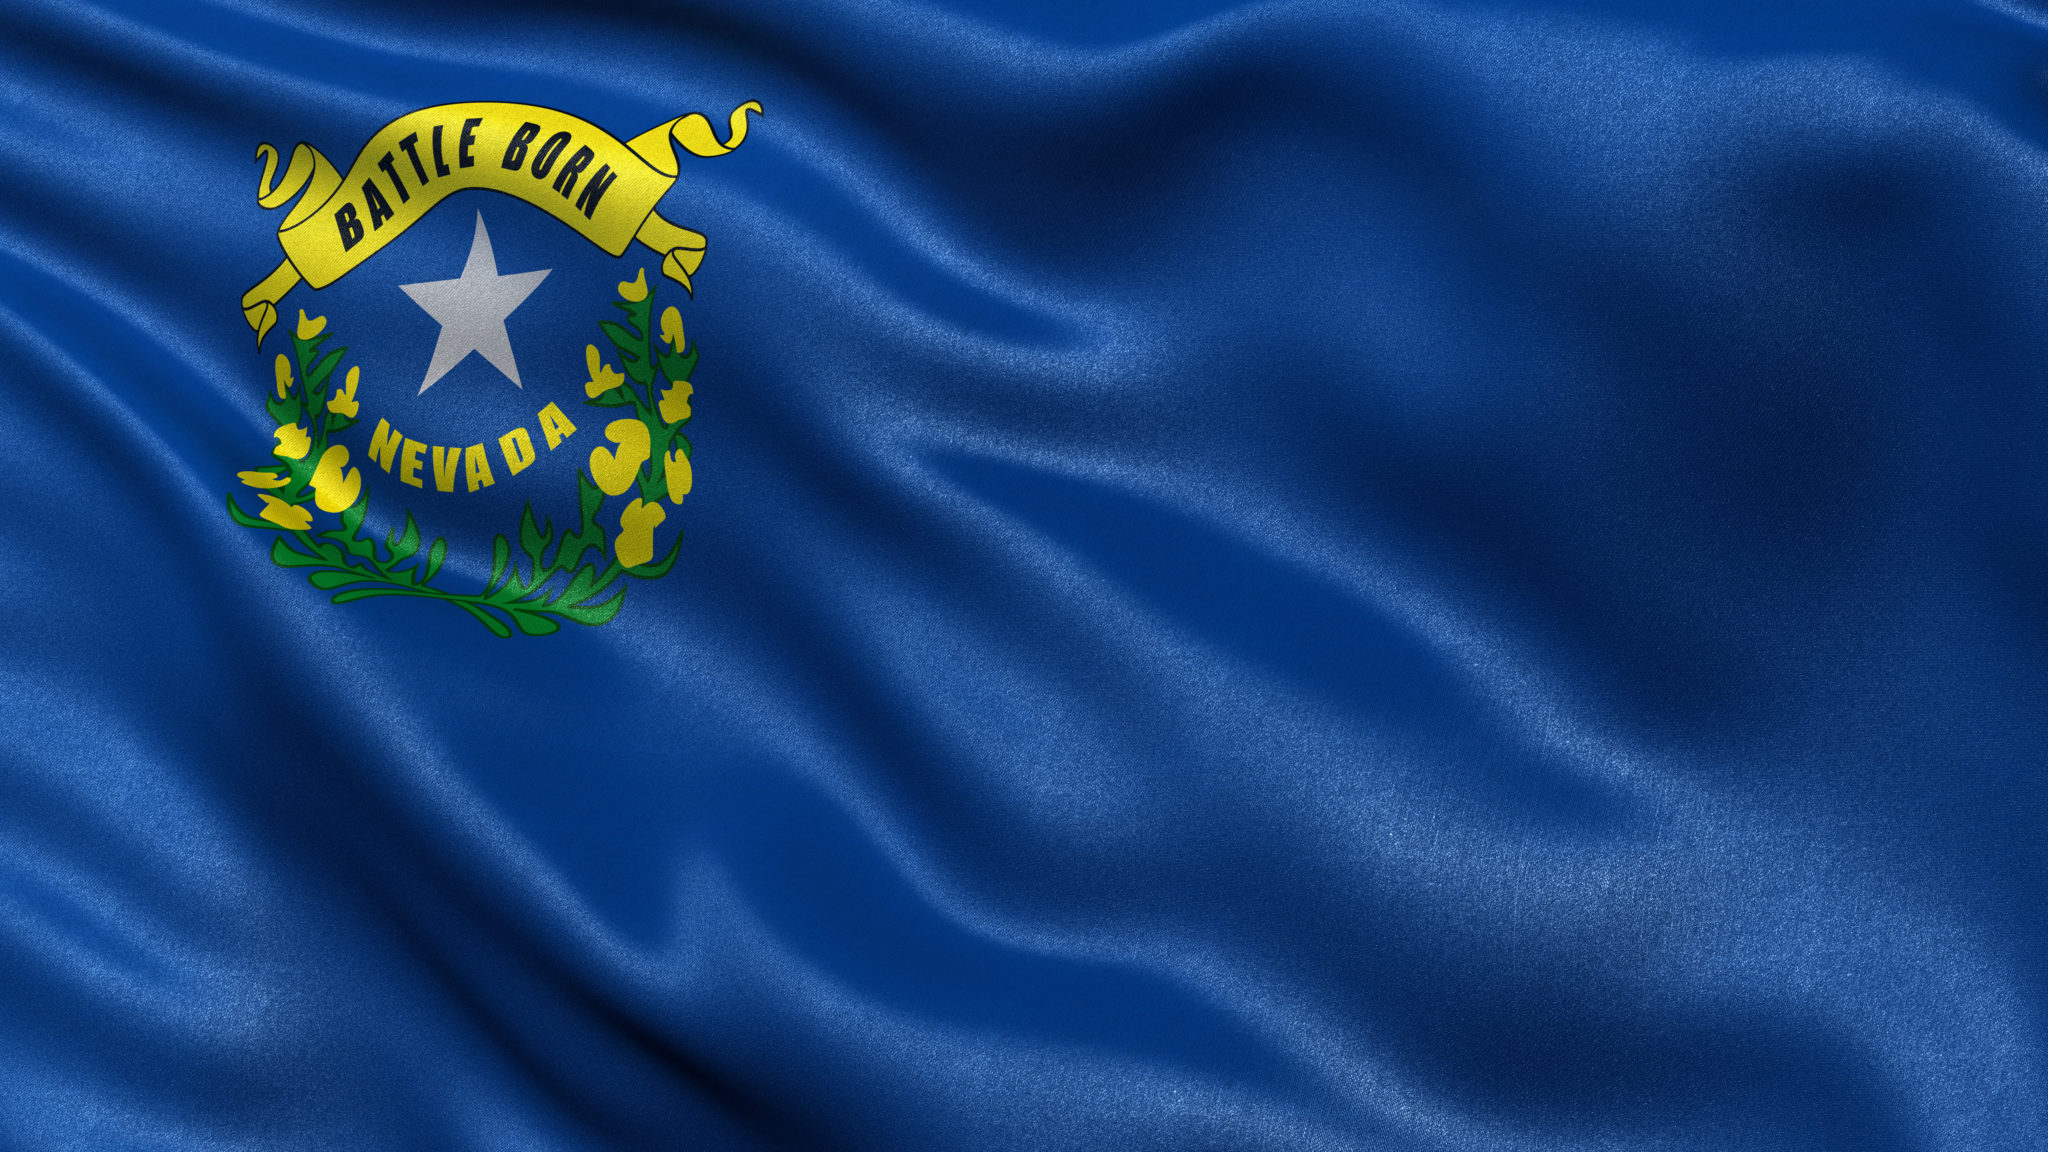 US state flag of Nevada with great detail waving in the wind.